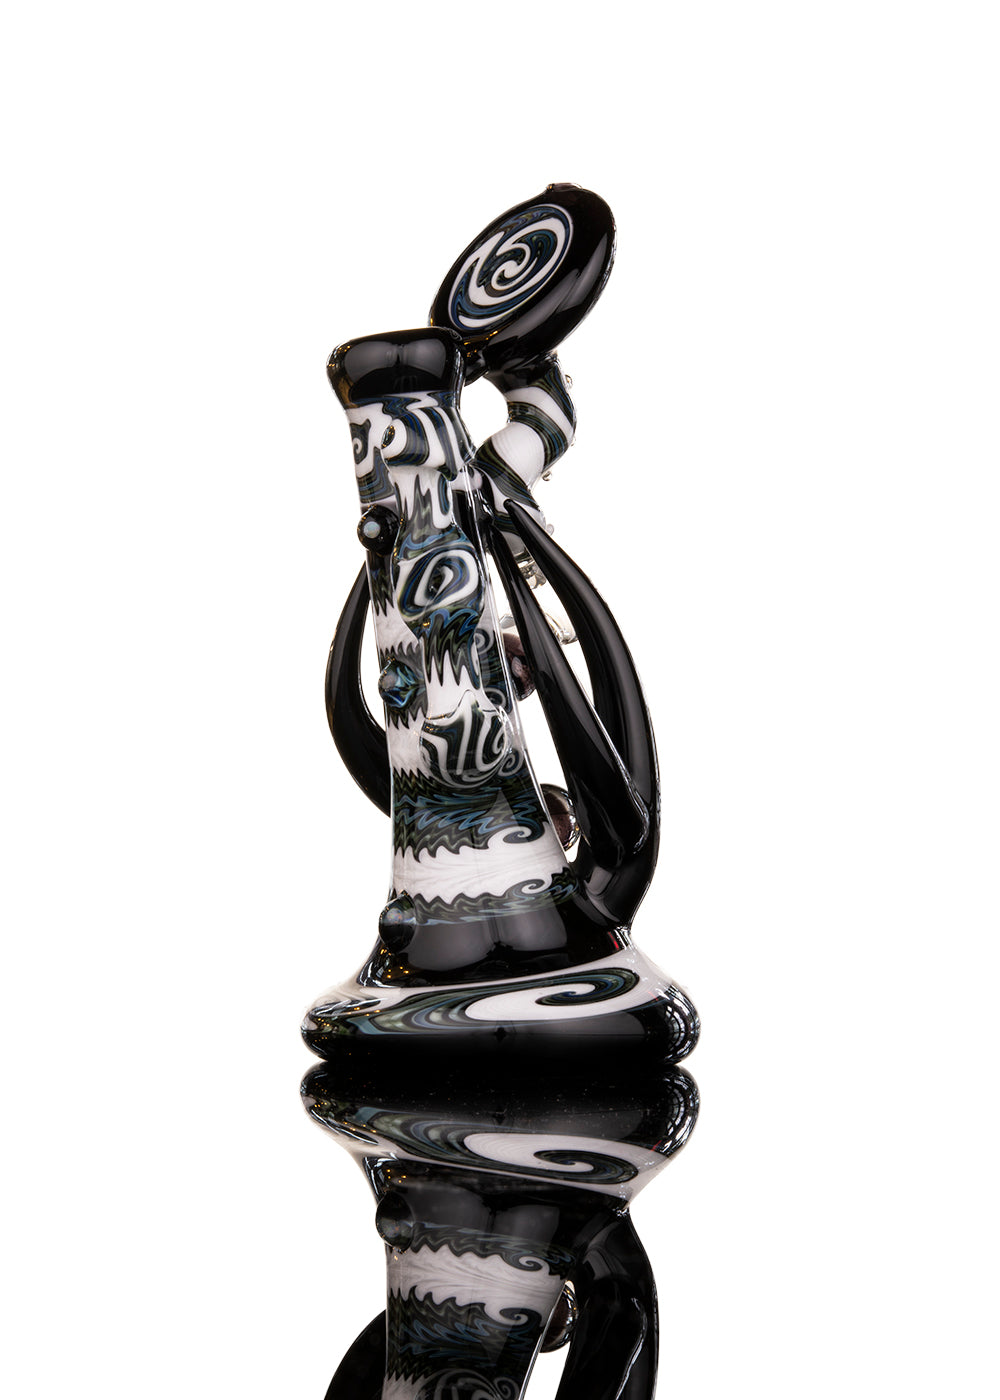 COWBOY X ARTY X ZOO Snorkle Carb Bubbler Collaboration by Cowboy, Arty, and Zoo